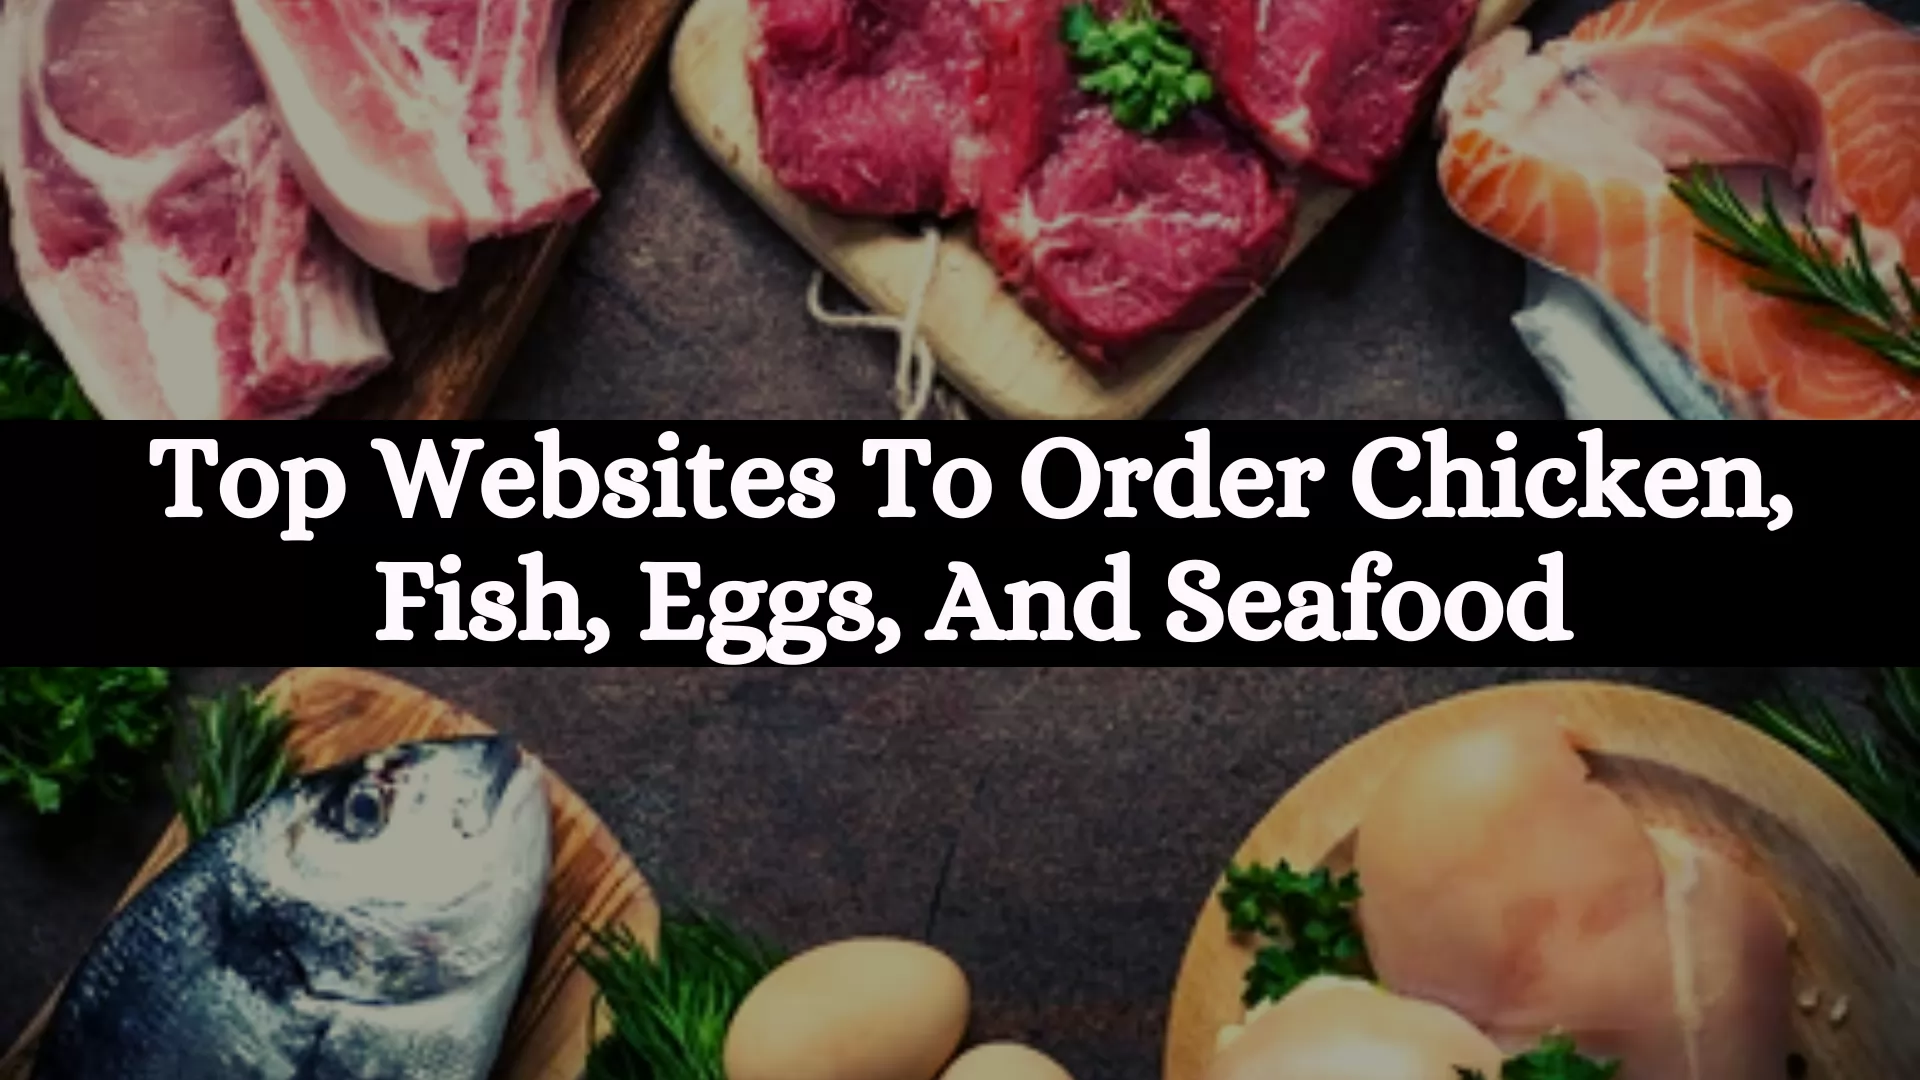 Top 7 Websites To Order Chicken, Fish, Eggs, And Seafood